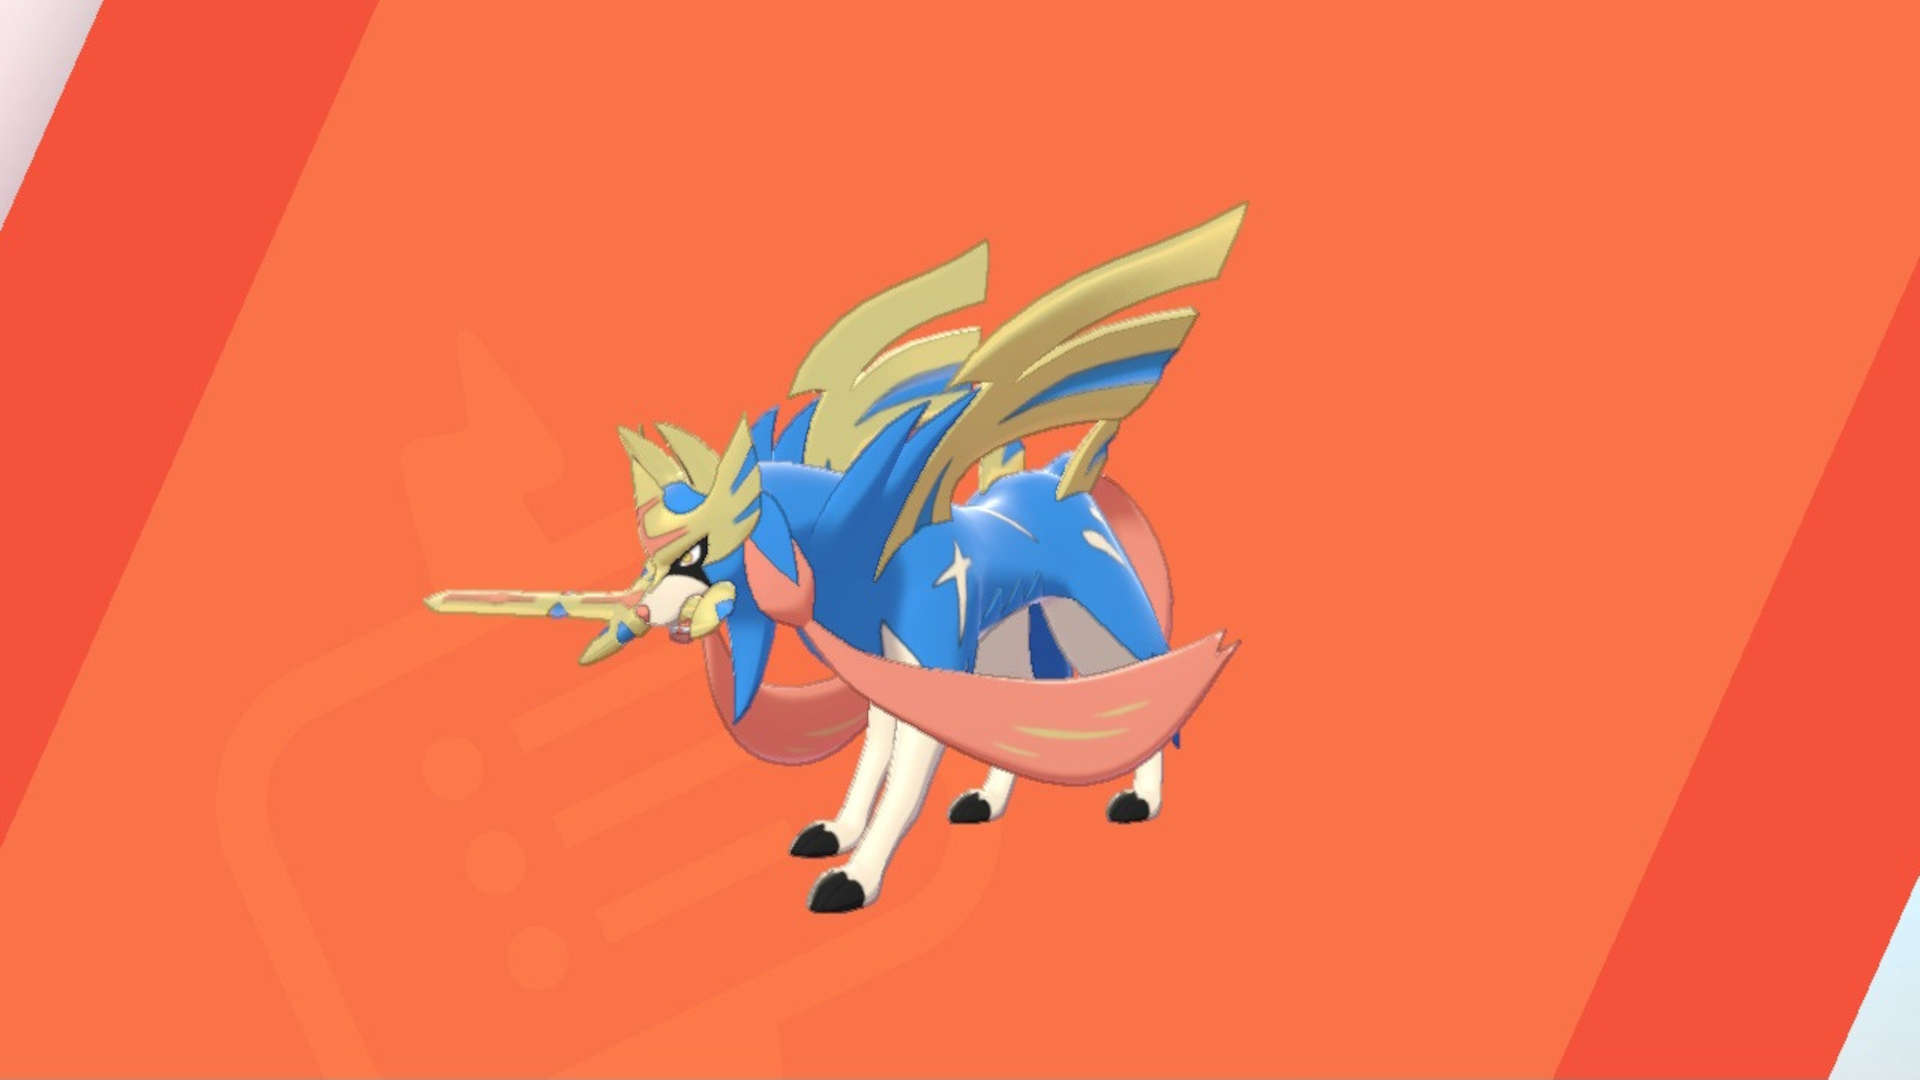 Pokémon Sword and Shield legendary Pokémon: Zacian, a dog-like creature with a sword in its mouth, standing against an orange background.